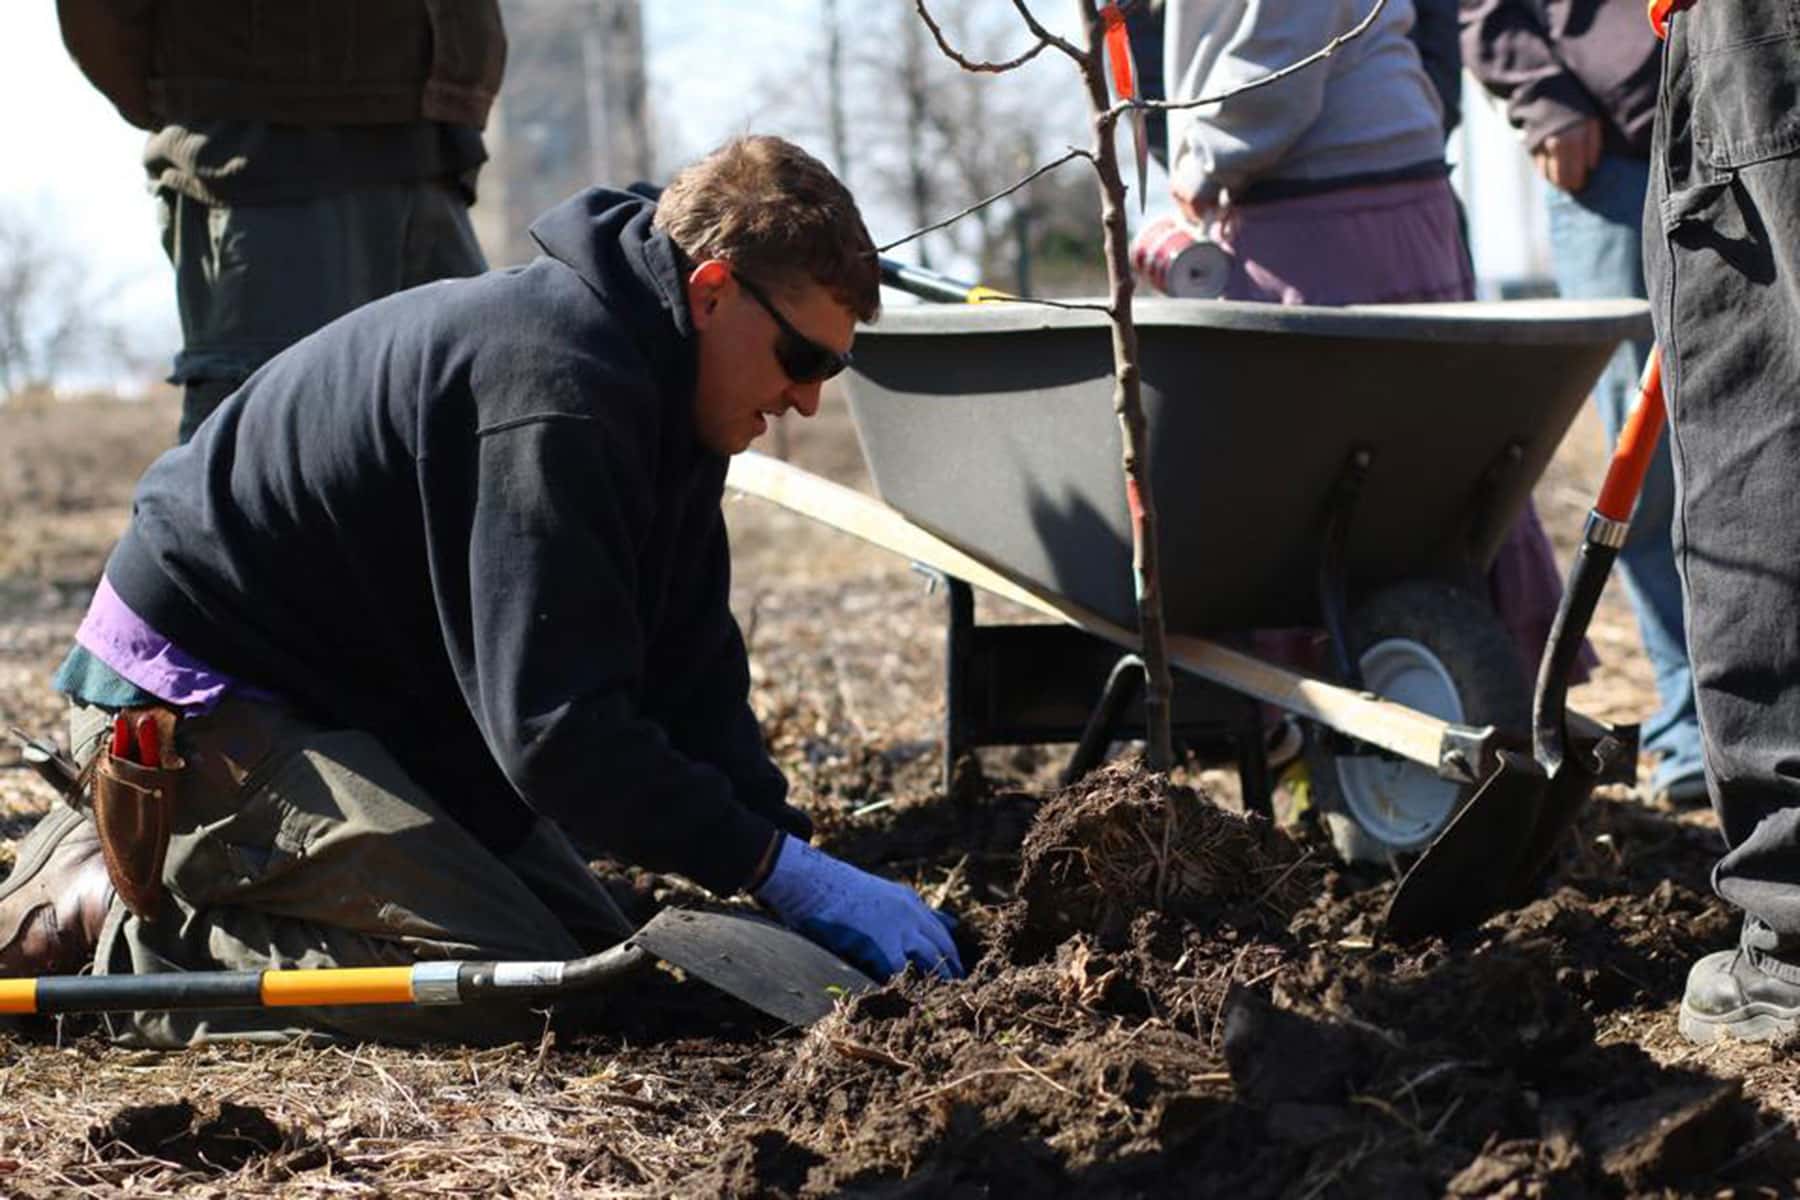 Victory Garden Initiative Celebrates Urban Orchards The